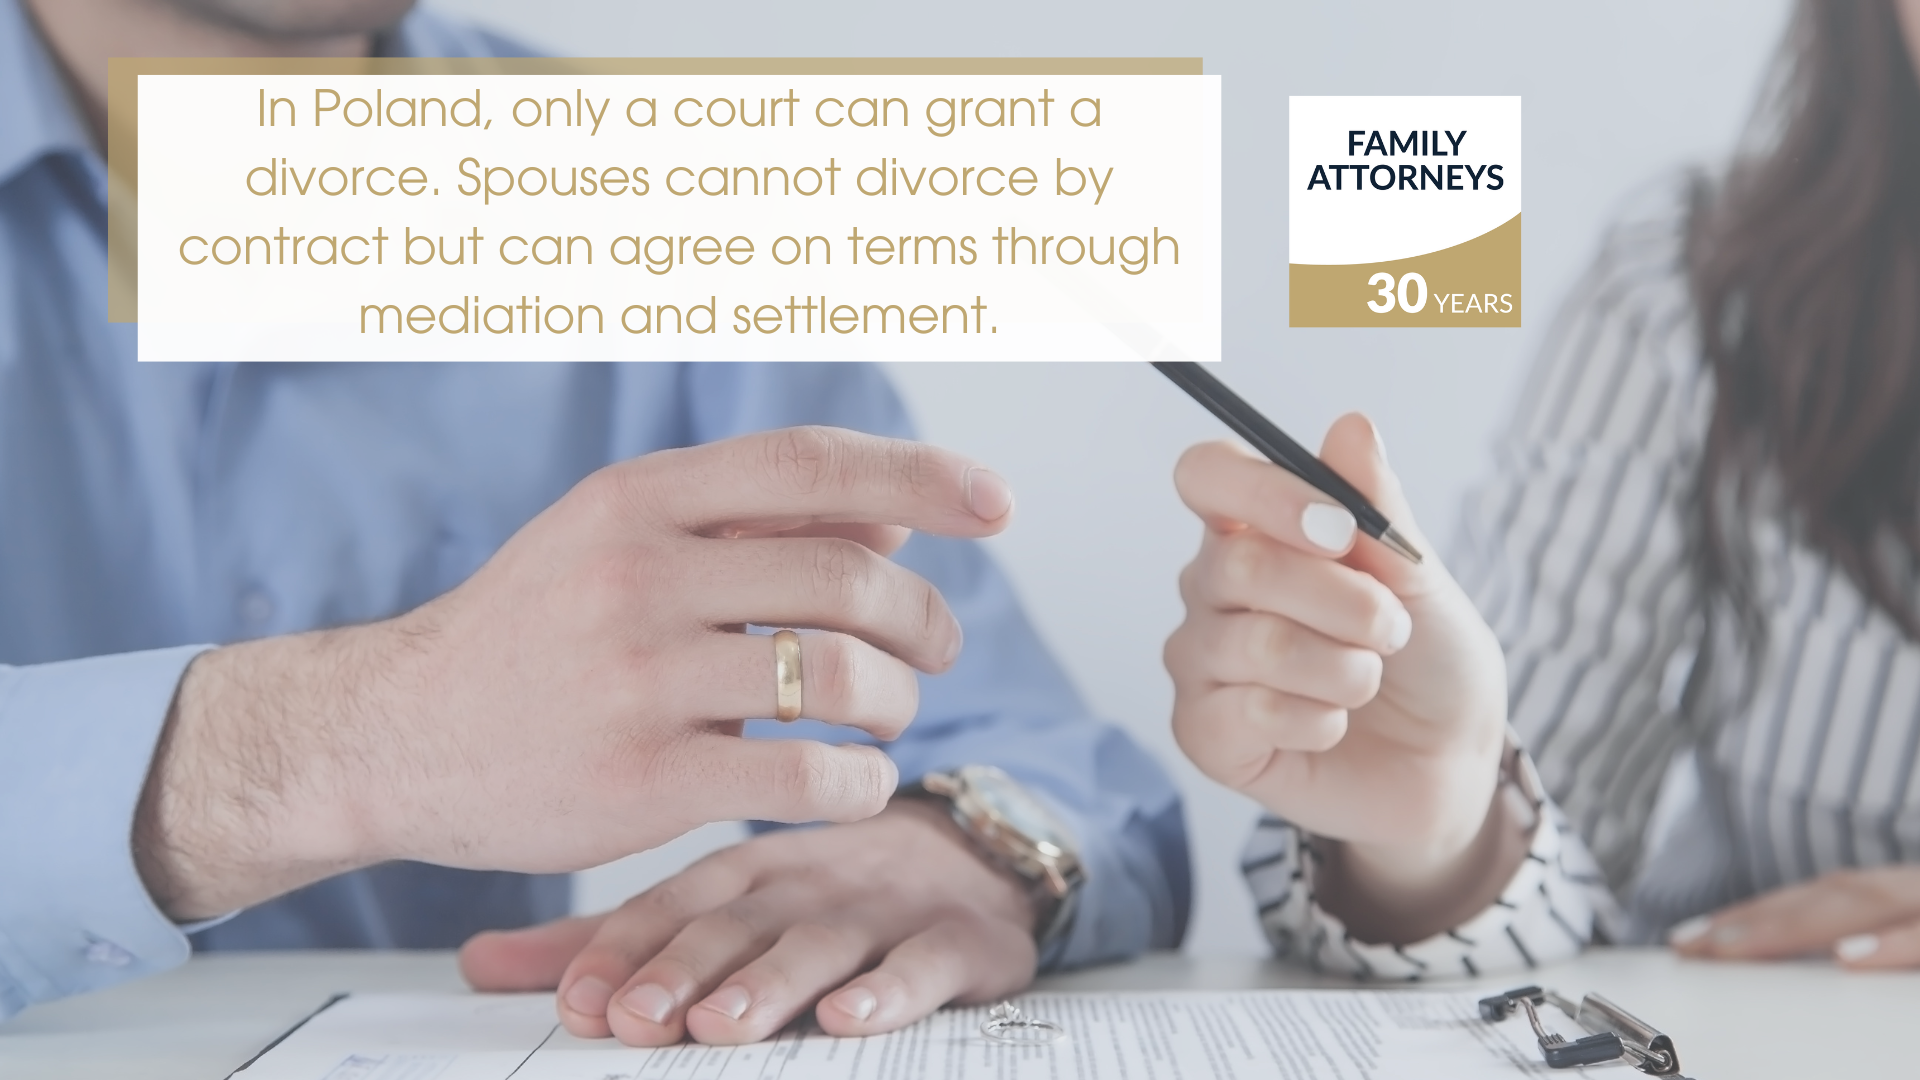 In Poland, only a court can grant a divorce. Spouses cannot divorce by contract but can agree on terms through mediation and settlement.